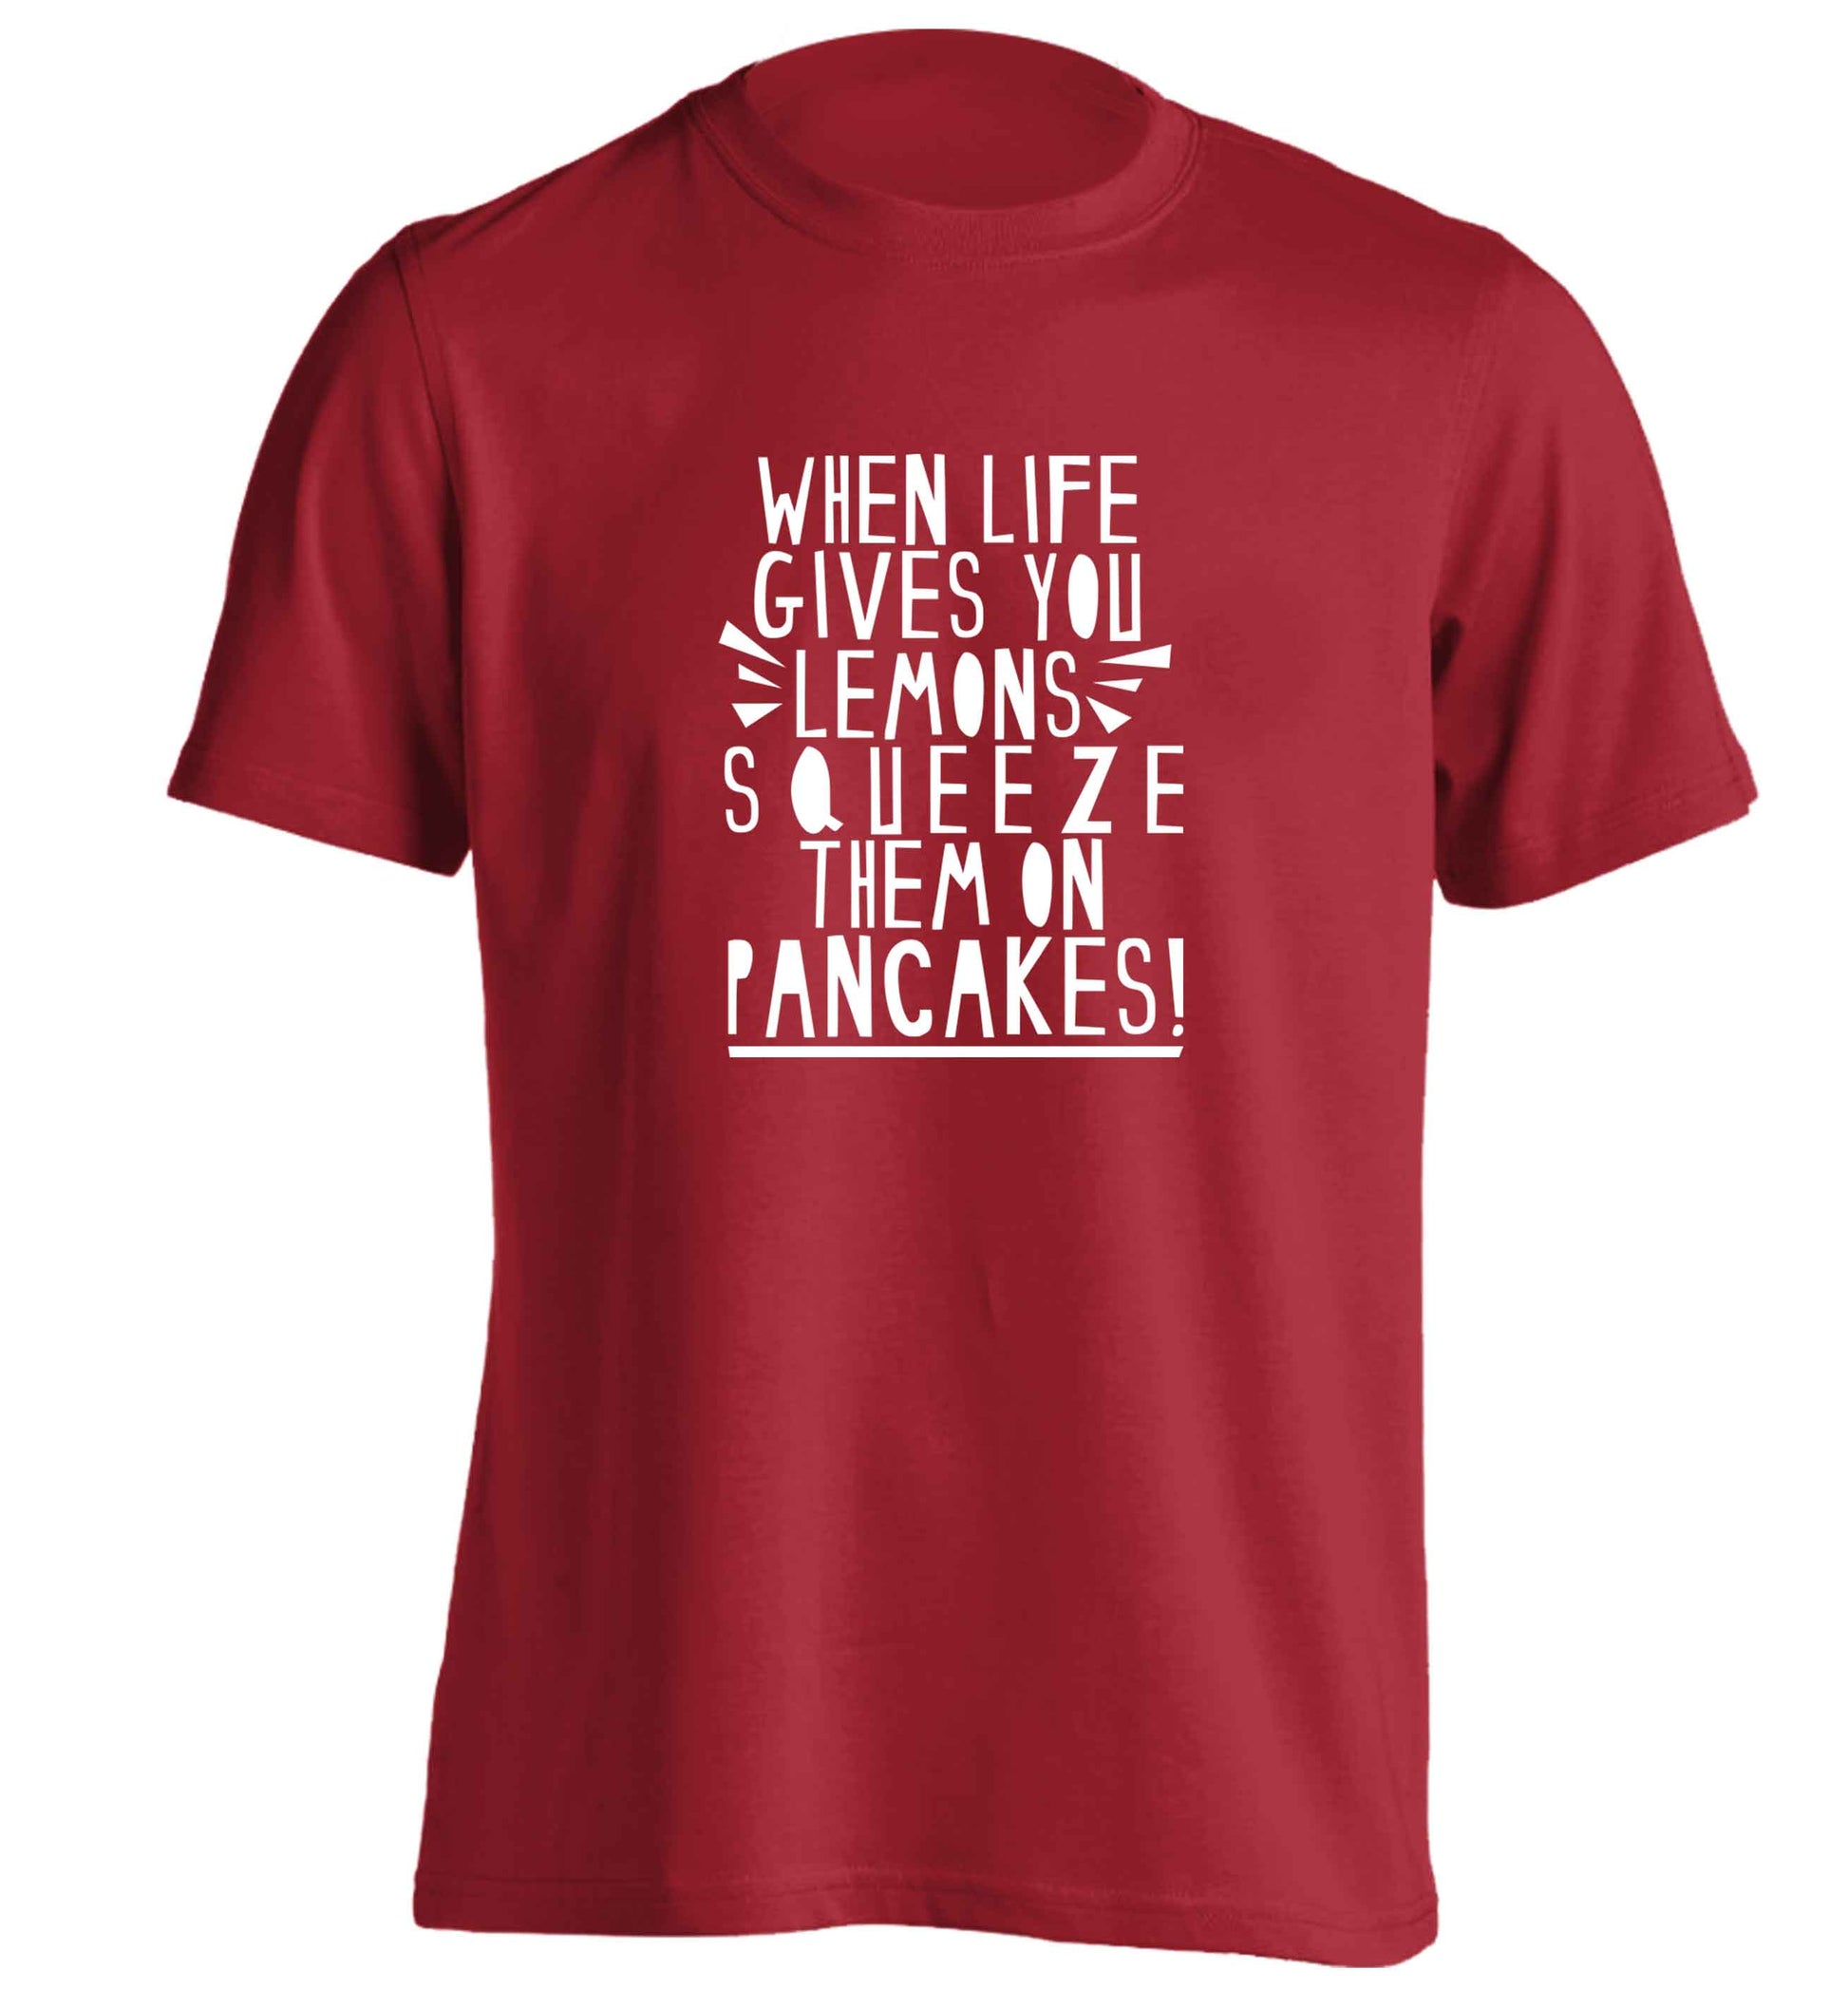 When life gives you lemons squeeze them on pancakes! adults unisex red Tshirt 2XL